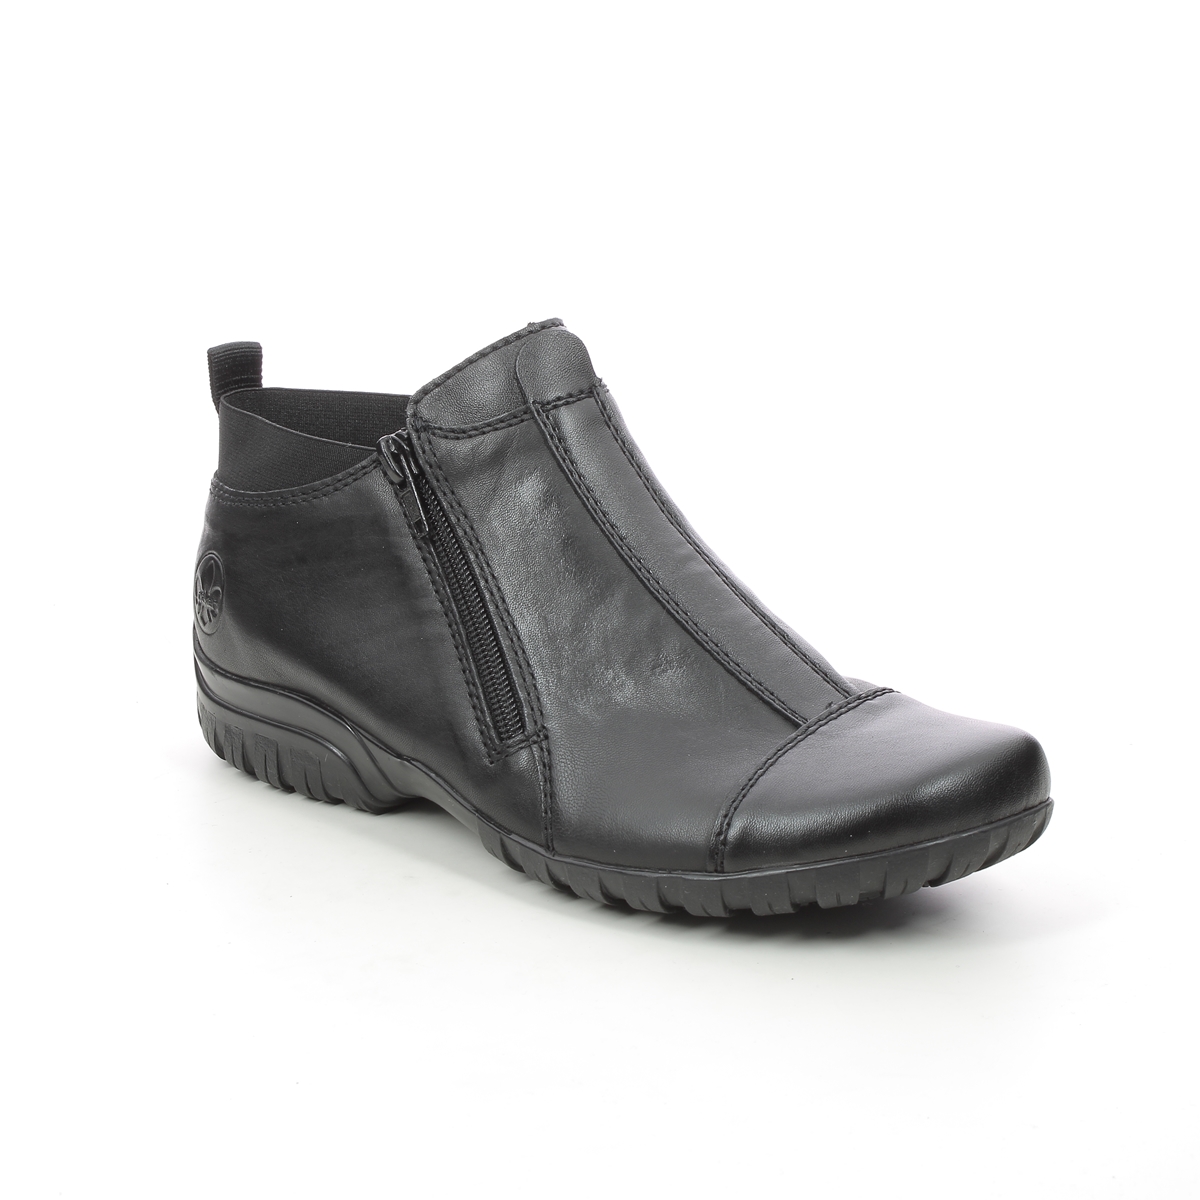 Rieker Birbocap 15 Black Leather Womens Ankle Boots L4653-00 In Size 40 In Plain Black Leather